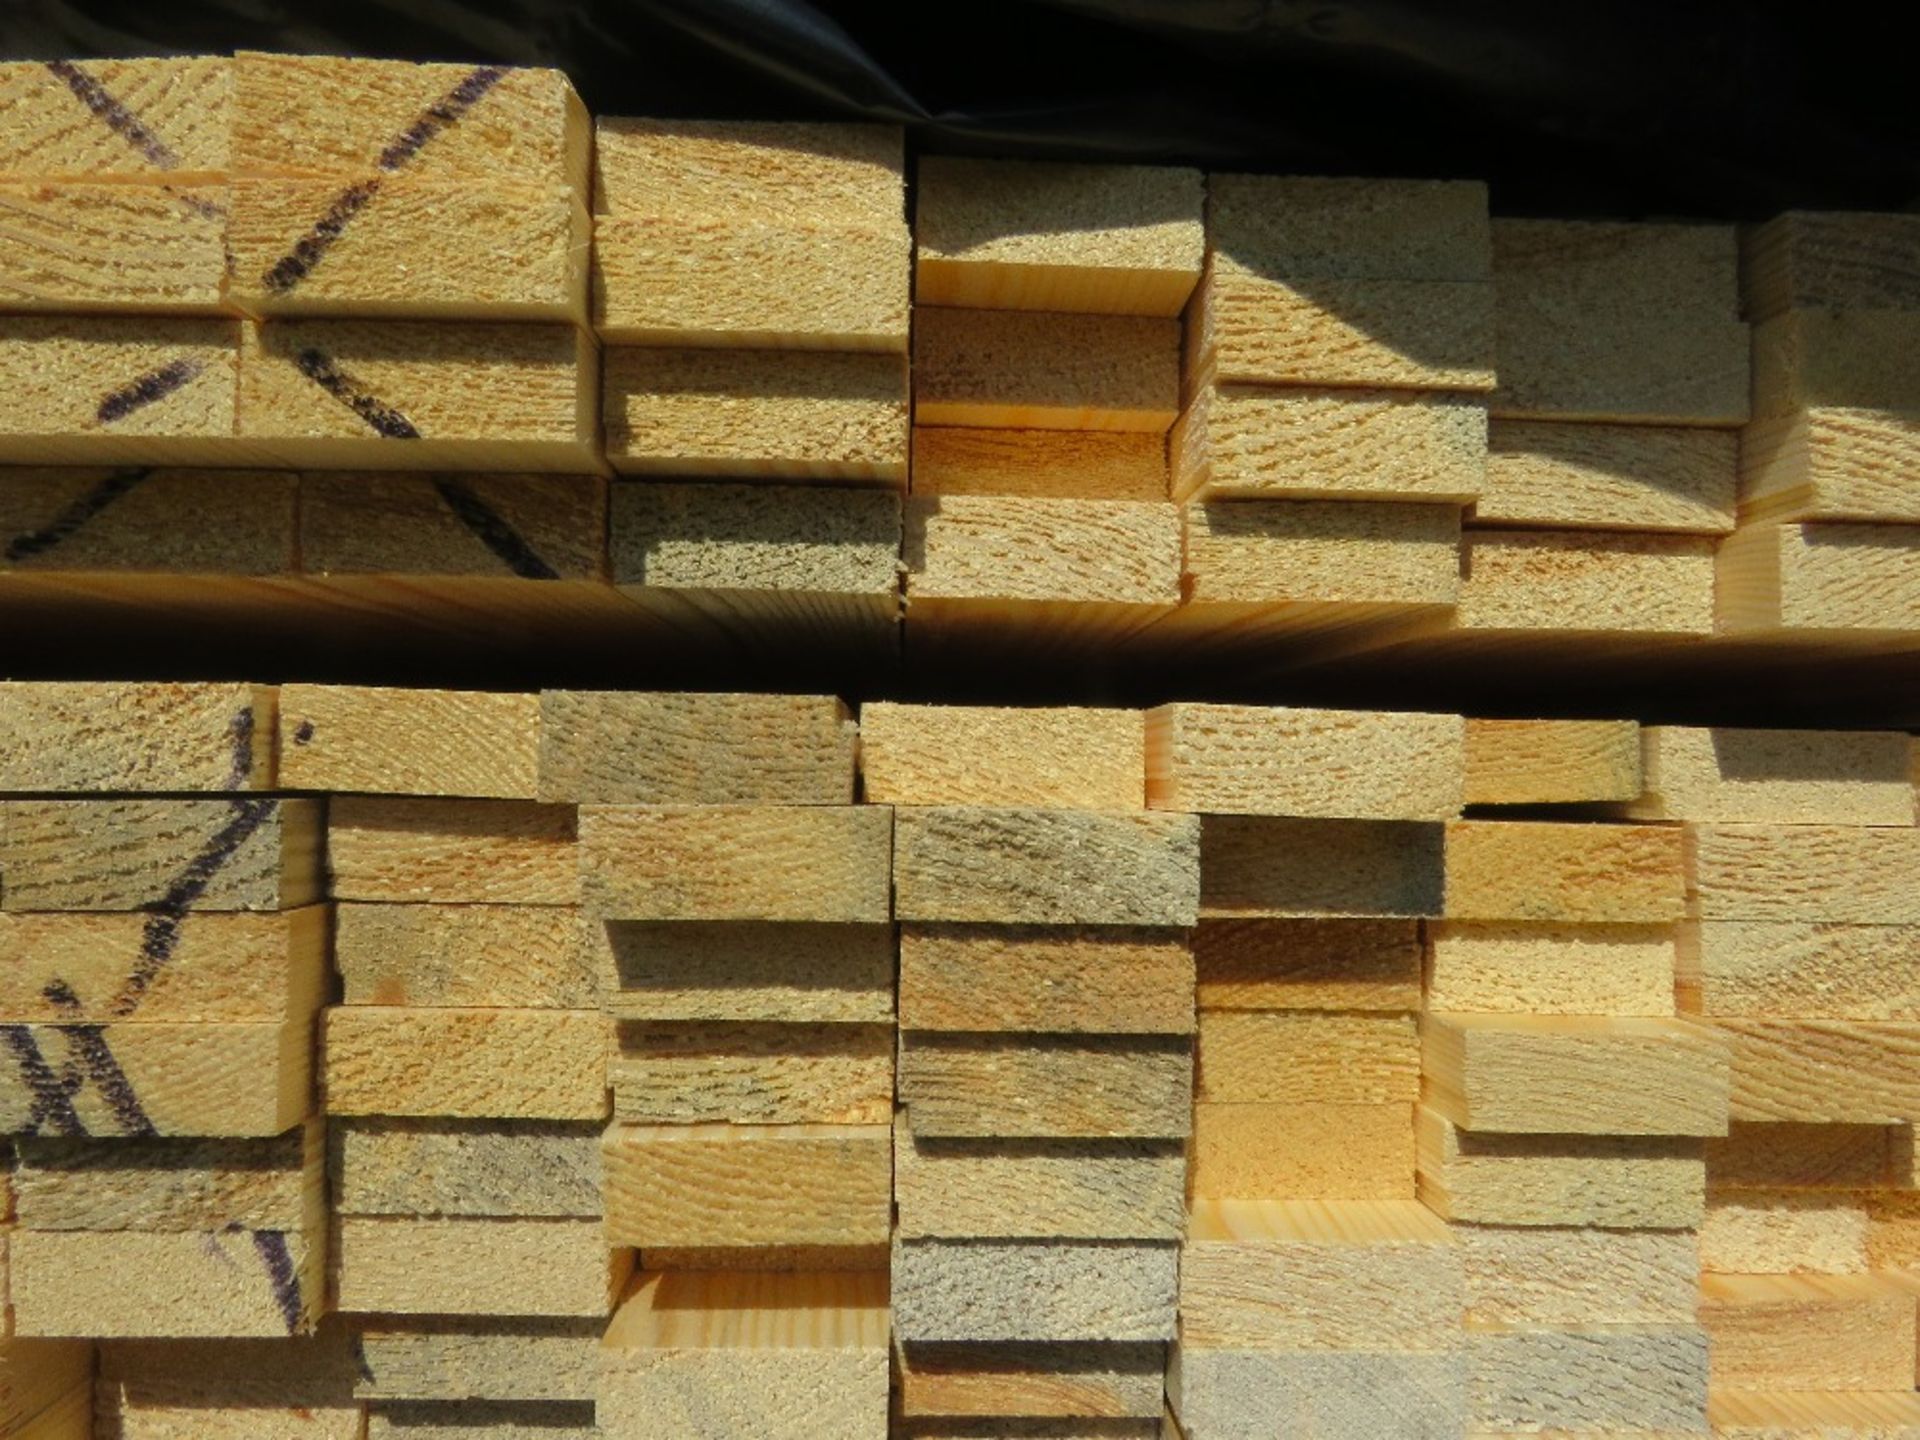 PACK OF UNTREATED VENETIAN FENCE / TRELLIS SLAT TIMBER CLADDING: 1.74M X 45MM X 17MM APPROX. - Image 3 of 3